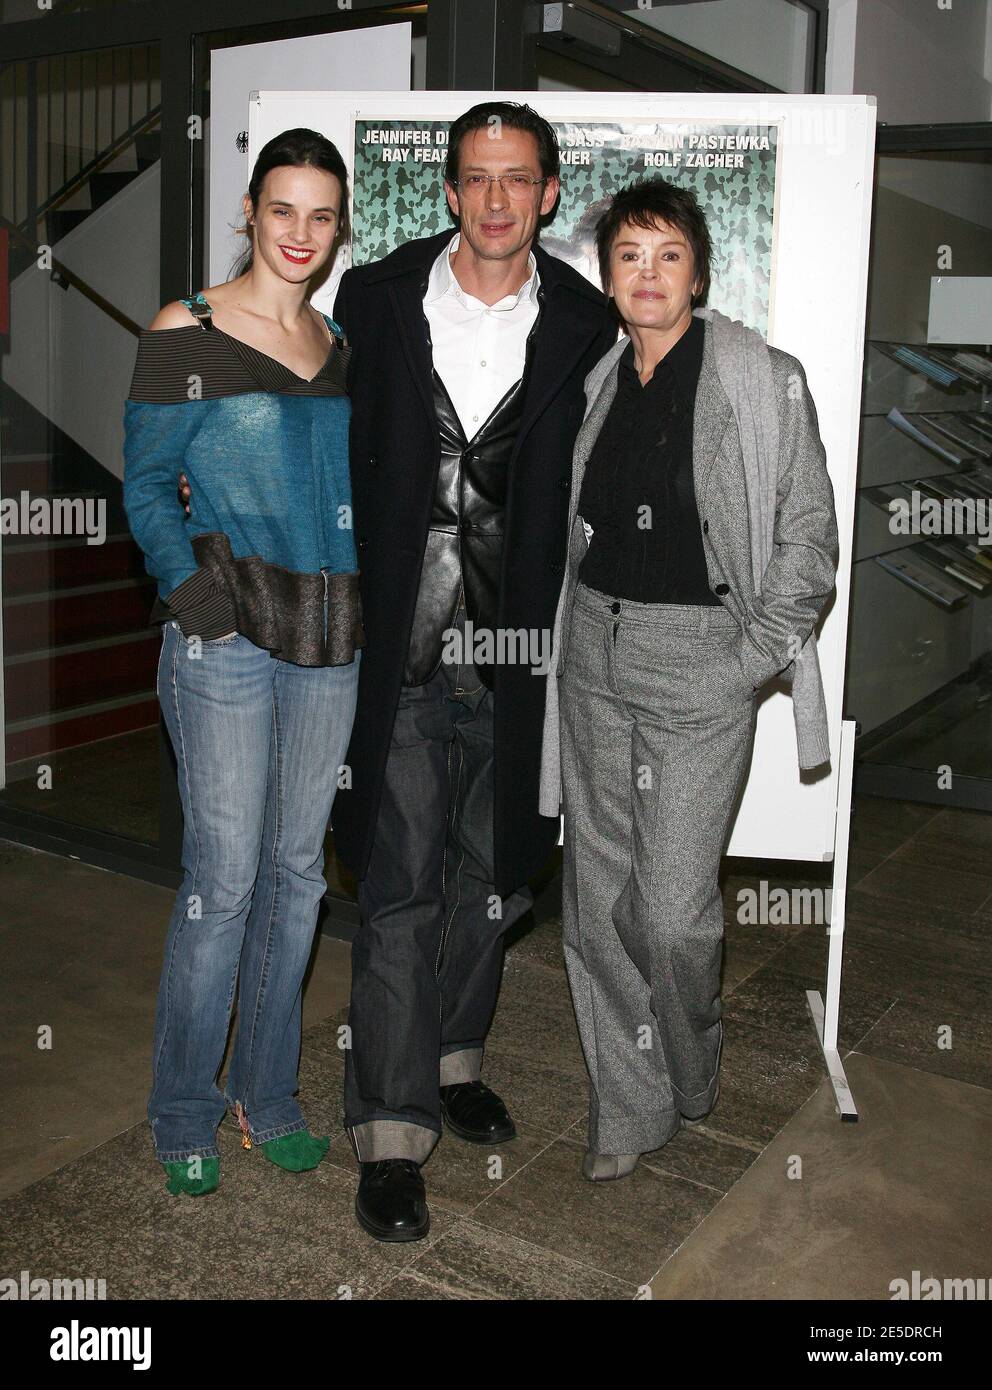 Actresses Jennifer Decker and Katrin Saas and Director Oskar Roehler pose  during the French premiere of 'Lulu and Jimi' held at Goethe Institut in  Paris, France on December 4, 2008. Photo by